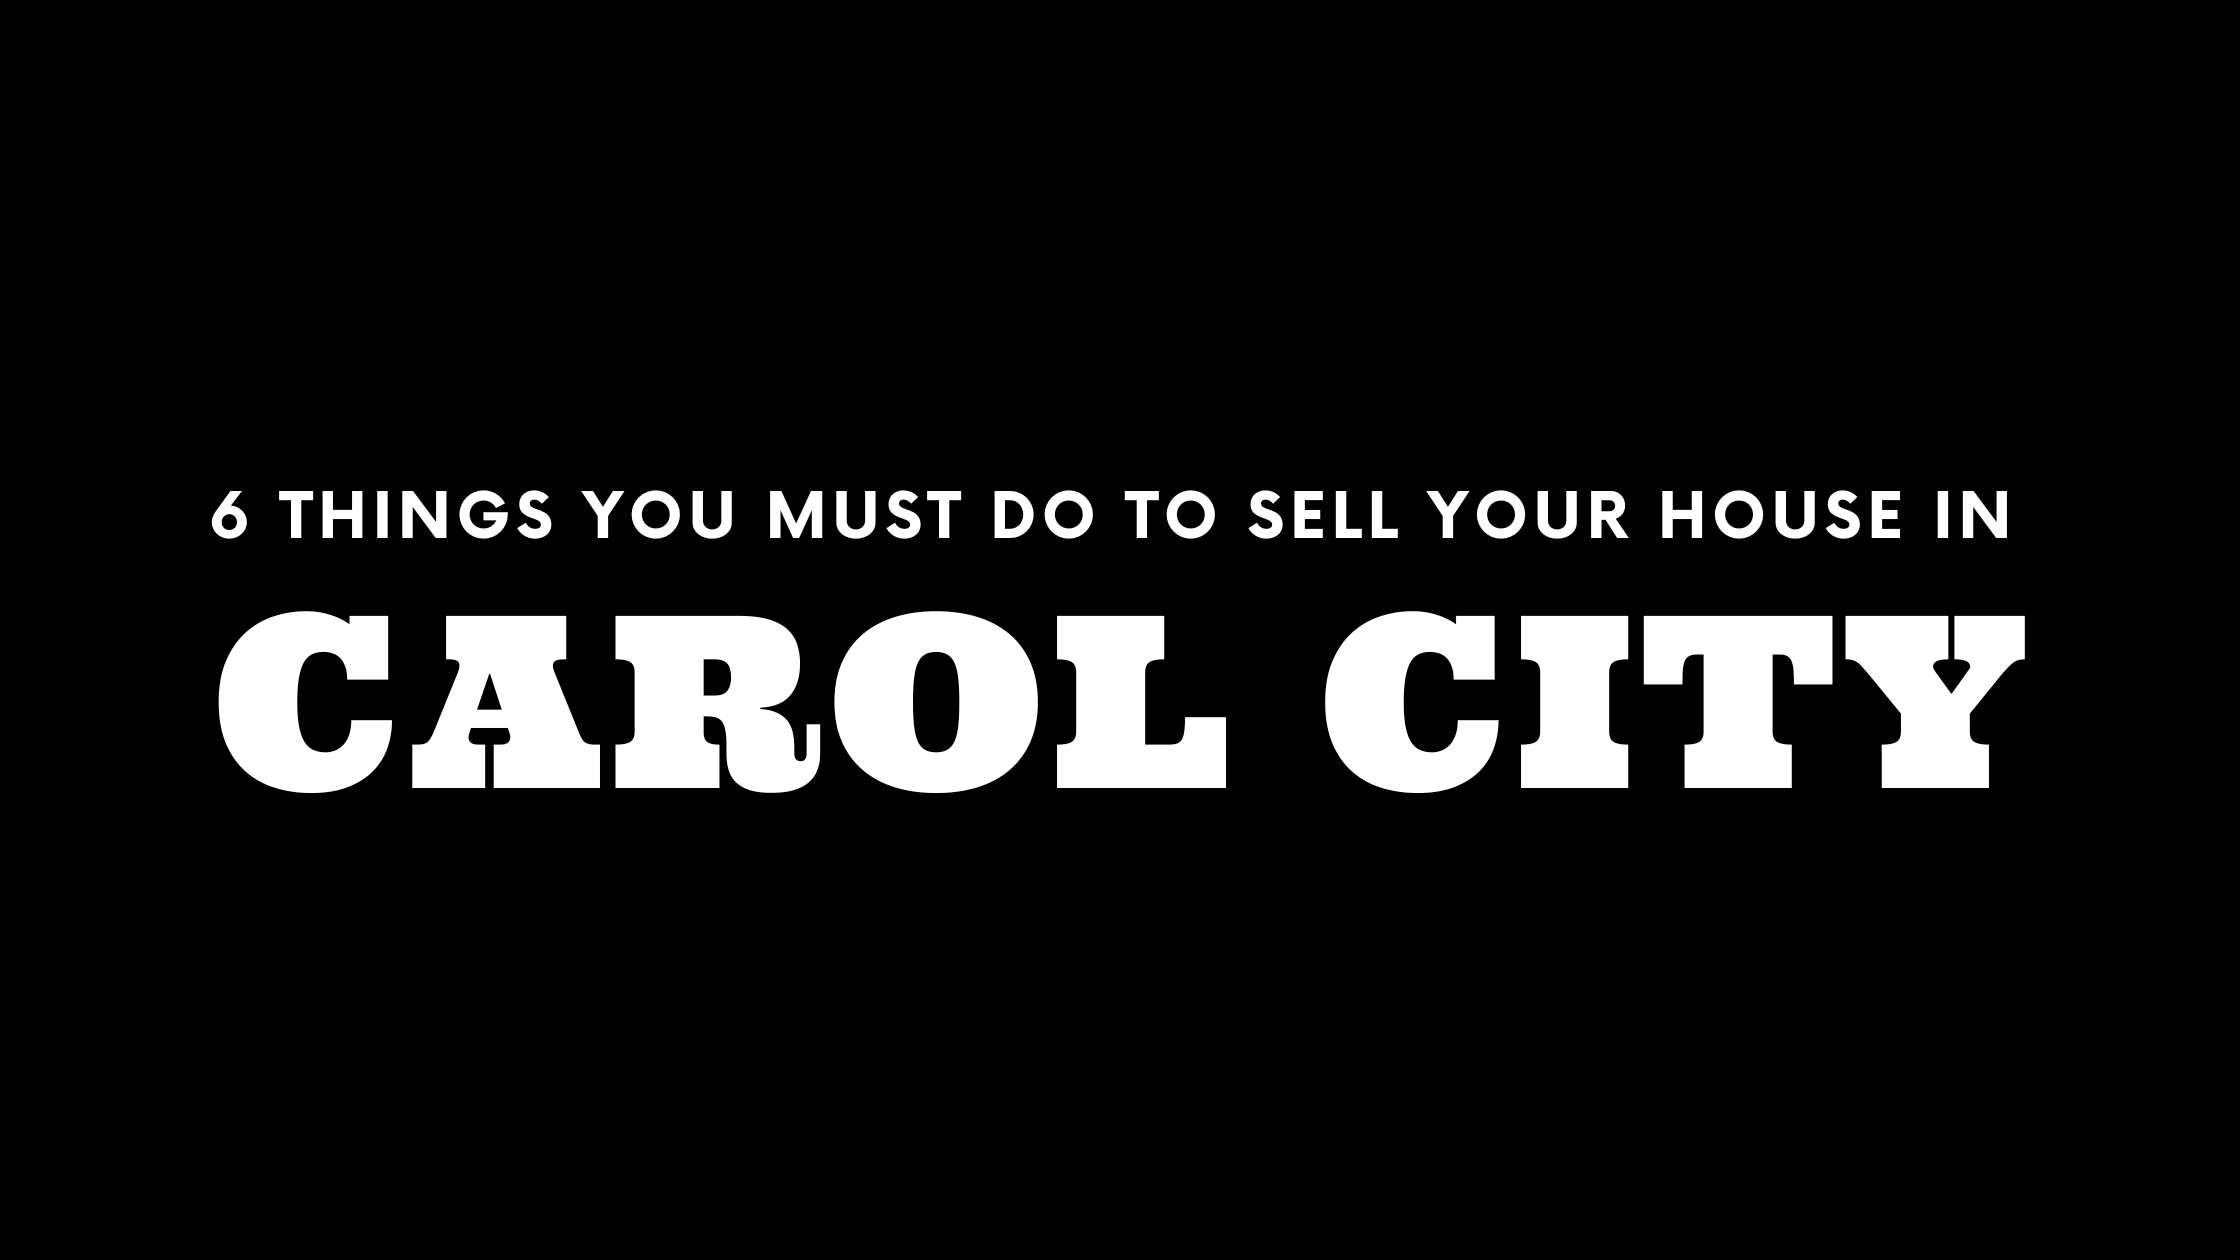 Selling Your House in Carol City? 6 Things You MUST Do!